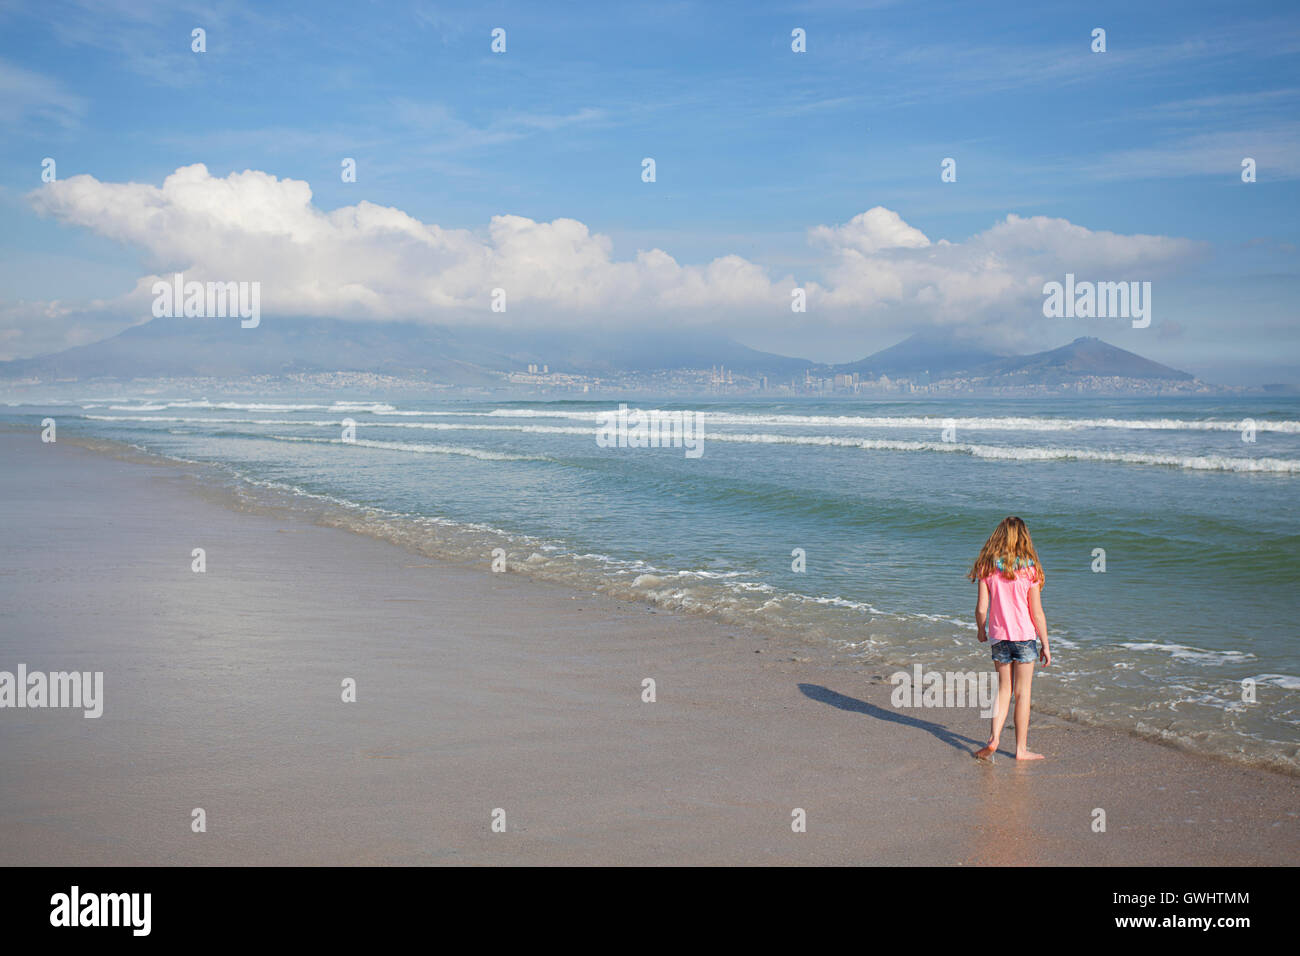 Young girl standing on the beach with Table Mountain in the background, Milnerton Beach, Western Cape, South Africa Stock Photo